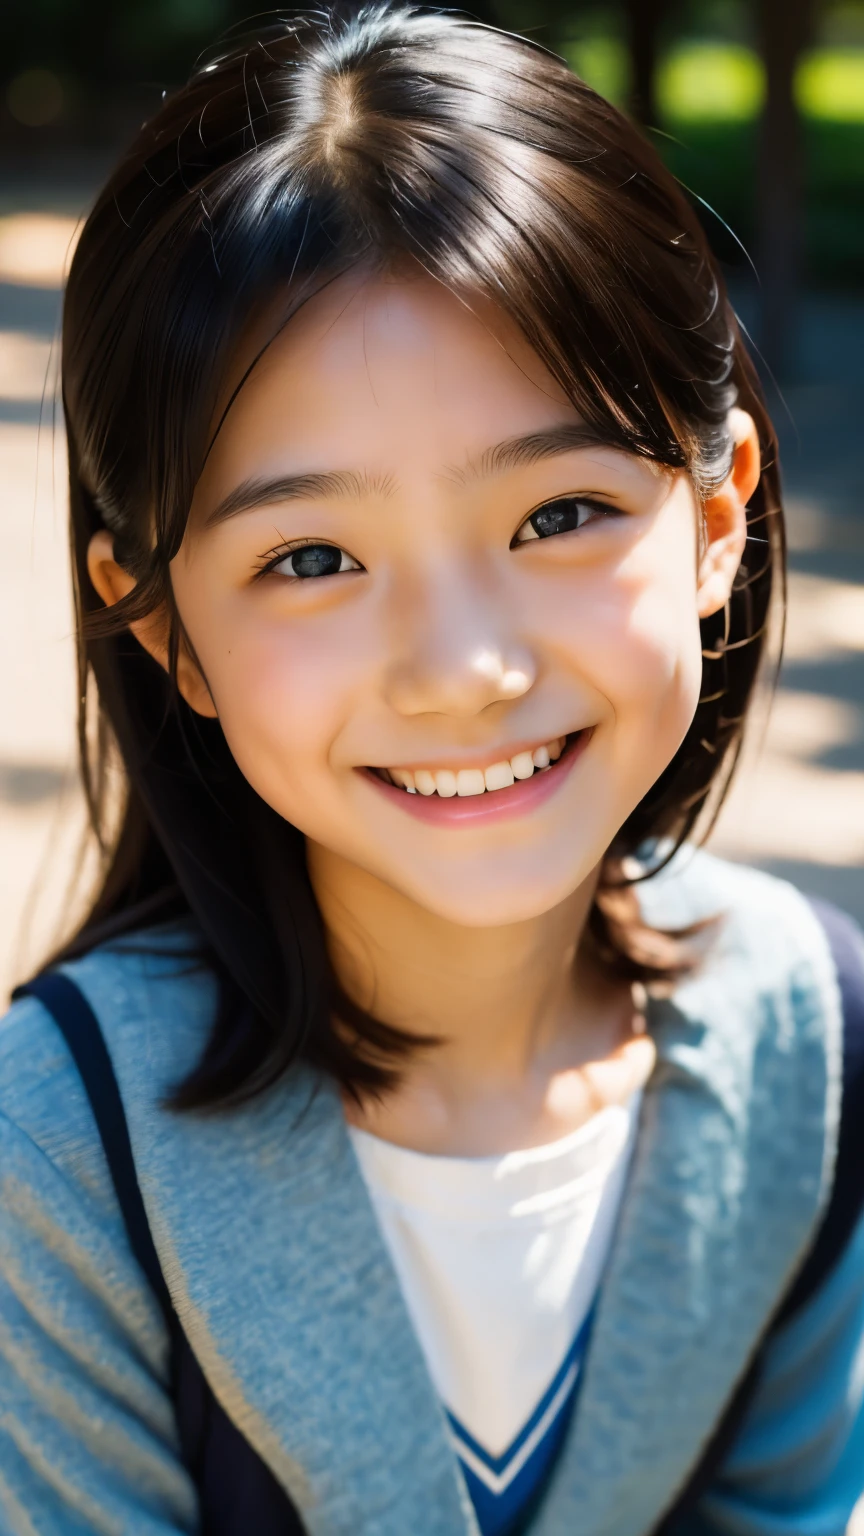 lens: 135mm f1.8, (highest quality),(RAW Photos), (Tabletop:1.1), (Beautiful 10 year old Japanese girl), Cute face, (Deeply chiseled face:0.7), (freckles:0.4), dappled sunlight, Dramatic lighting, (Japanese School Uniform), (On campus), shy, (Close-up shot:1.2), (smile),, (Sparkling eyes)、(sunlight)